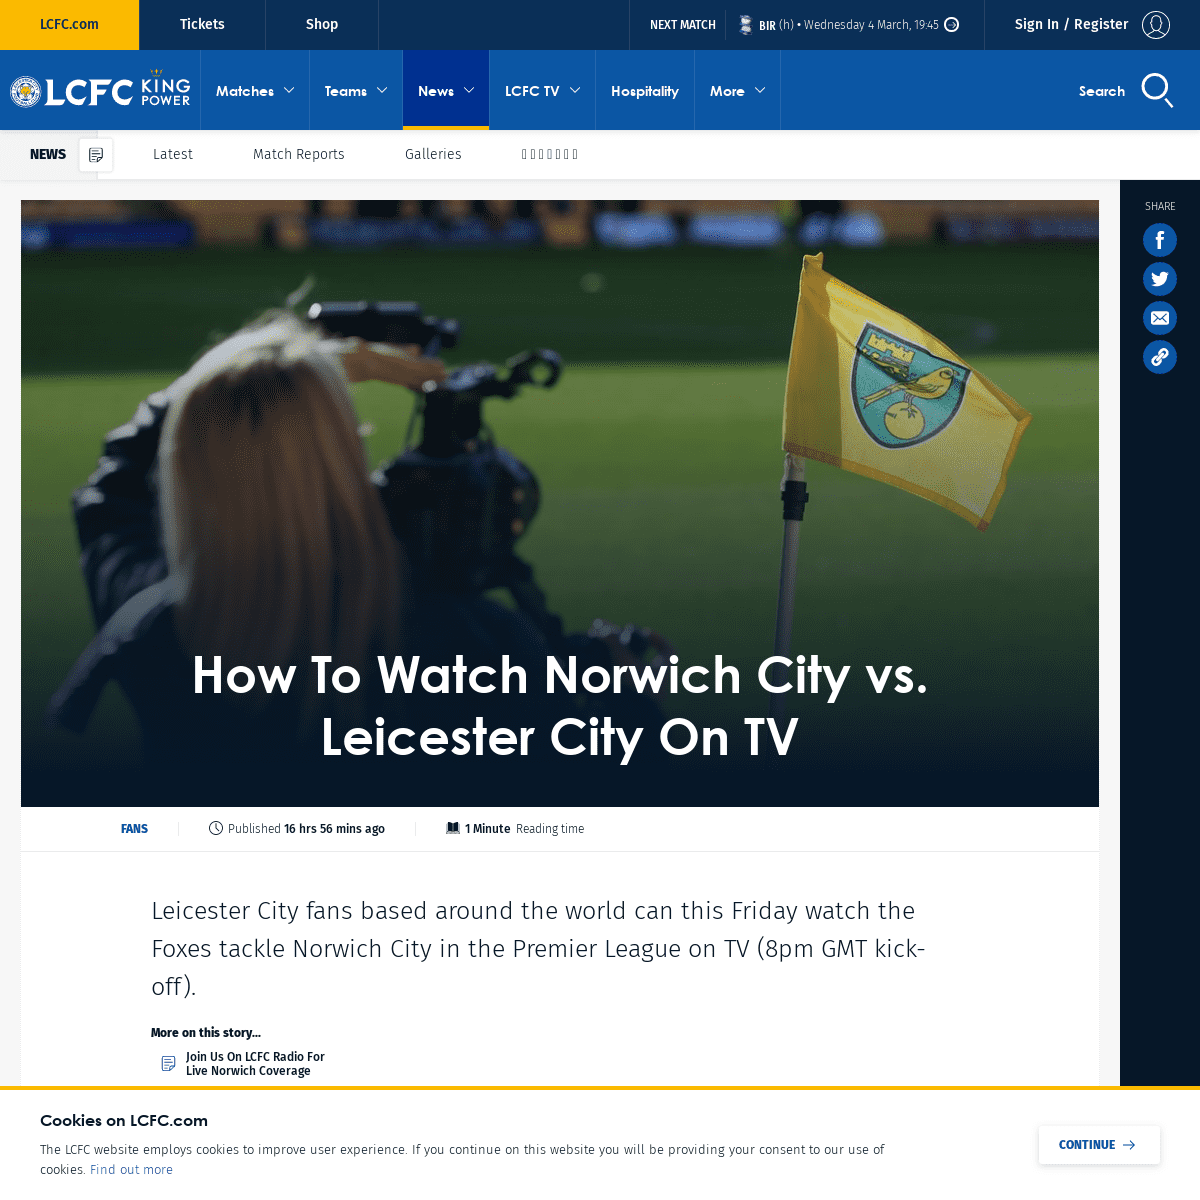 A complete backup of www.lcfc.com/news/1627512/how-to-watch-norwich-city-vs-leicester-city-on-tv